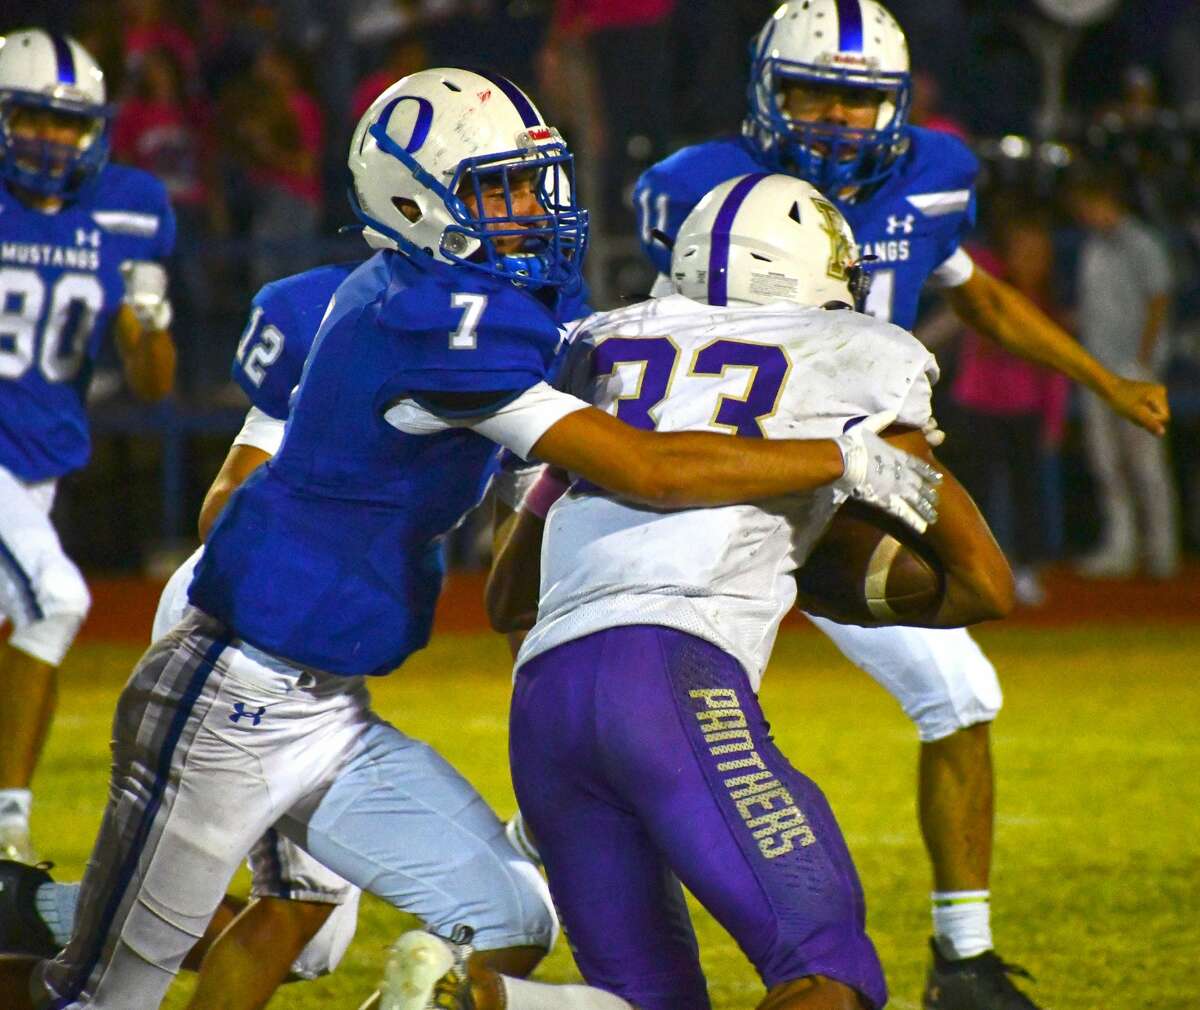 Olton hosted Panhandle in a District 1-2A Division I football game on Friday. 